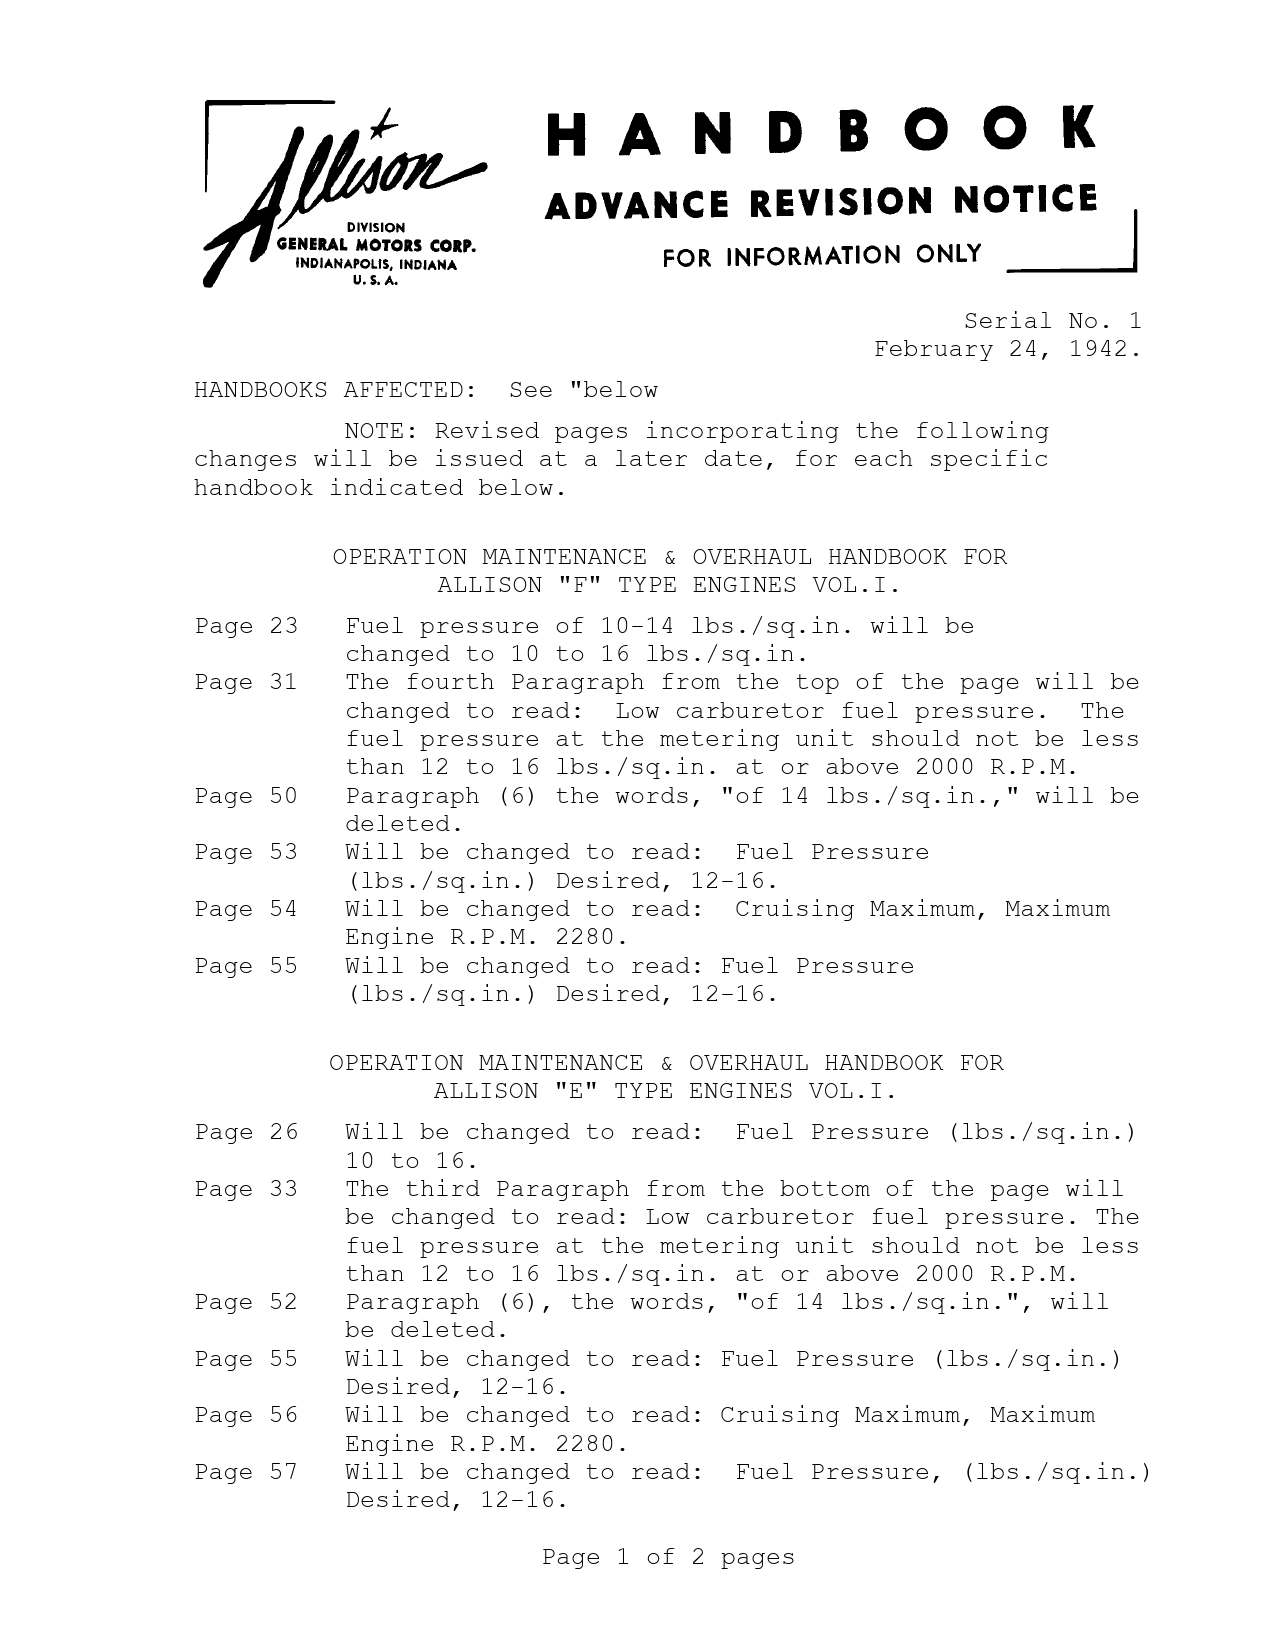 Sample page 1 from AirCorps Library document: Multi Handbook Revision Notice - Vol 1